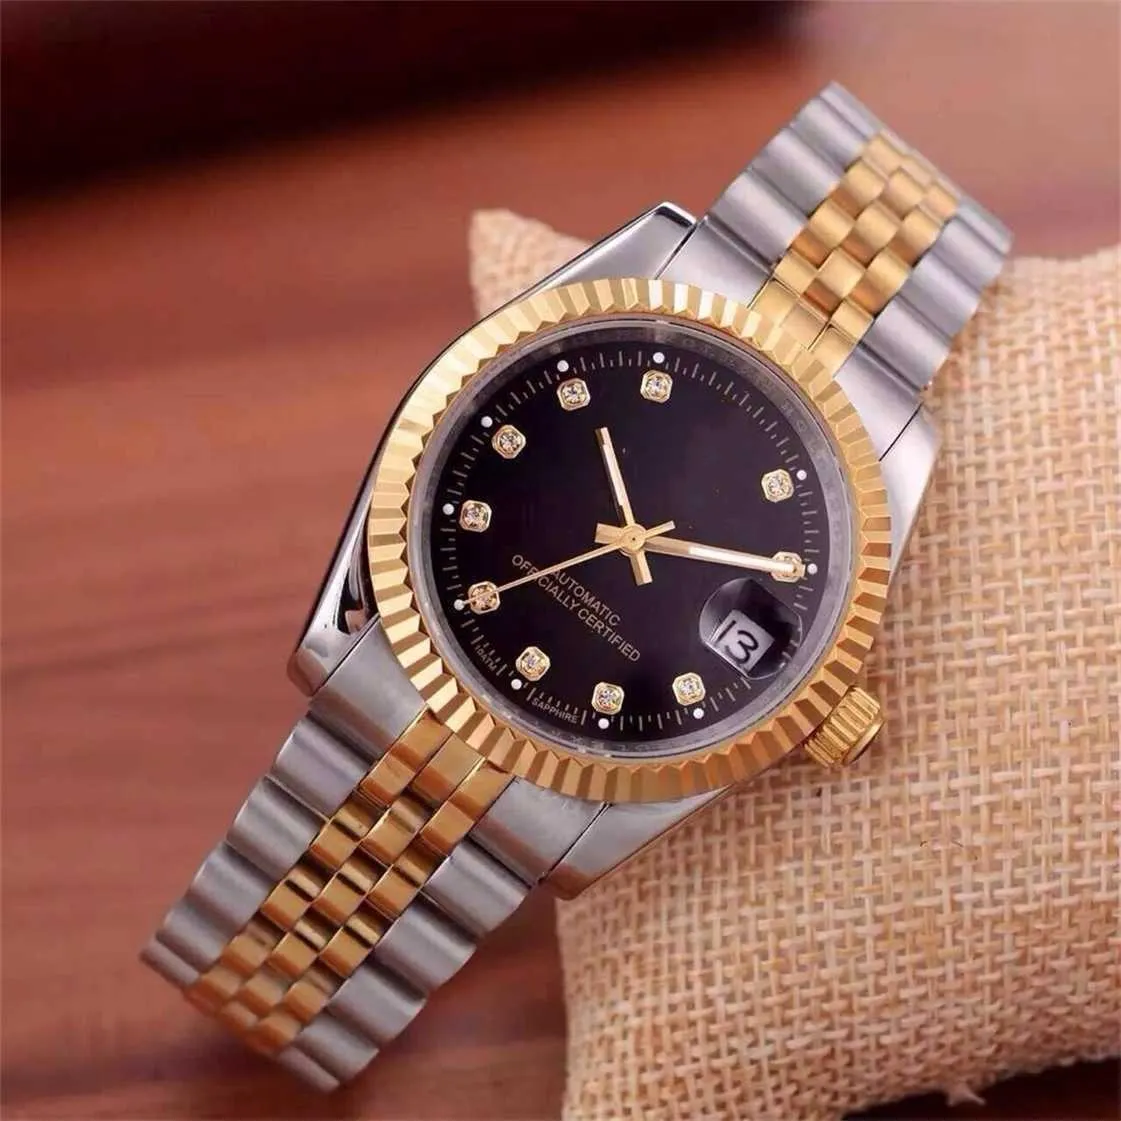 Designer Watch Cash Lao brand mechanical steel band watch for men women fashionable gorgeous elegant classic large quantity and high price